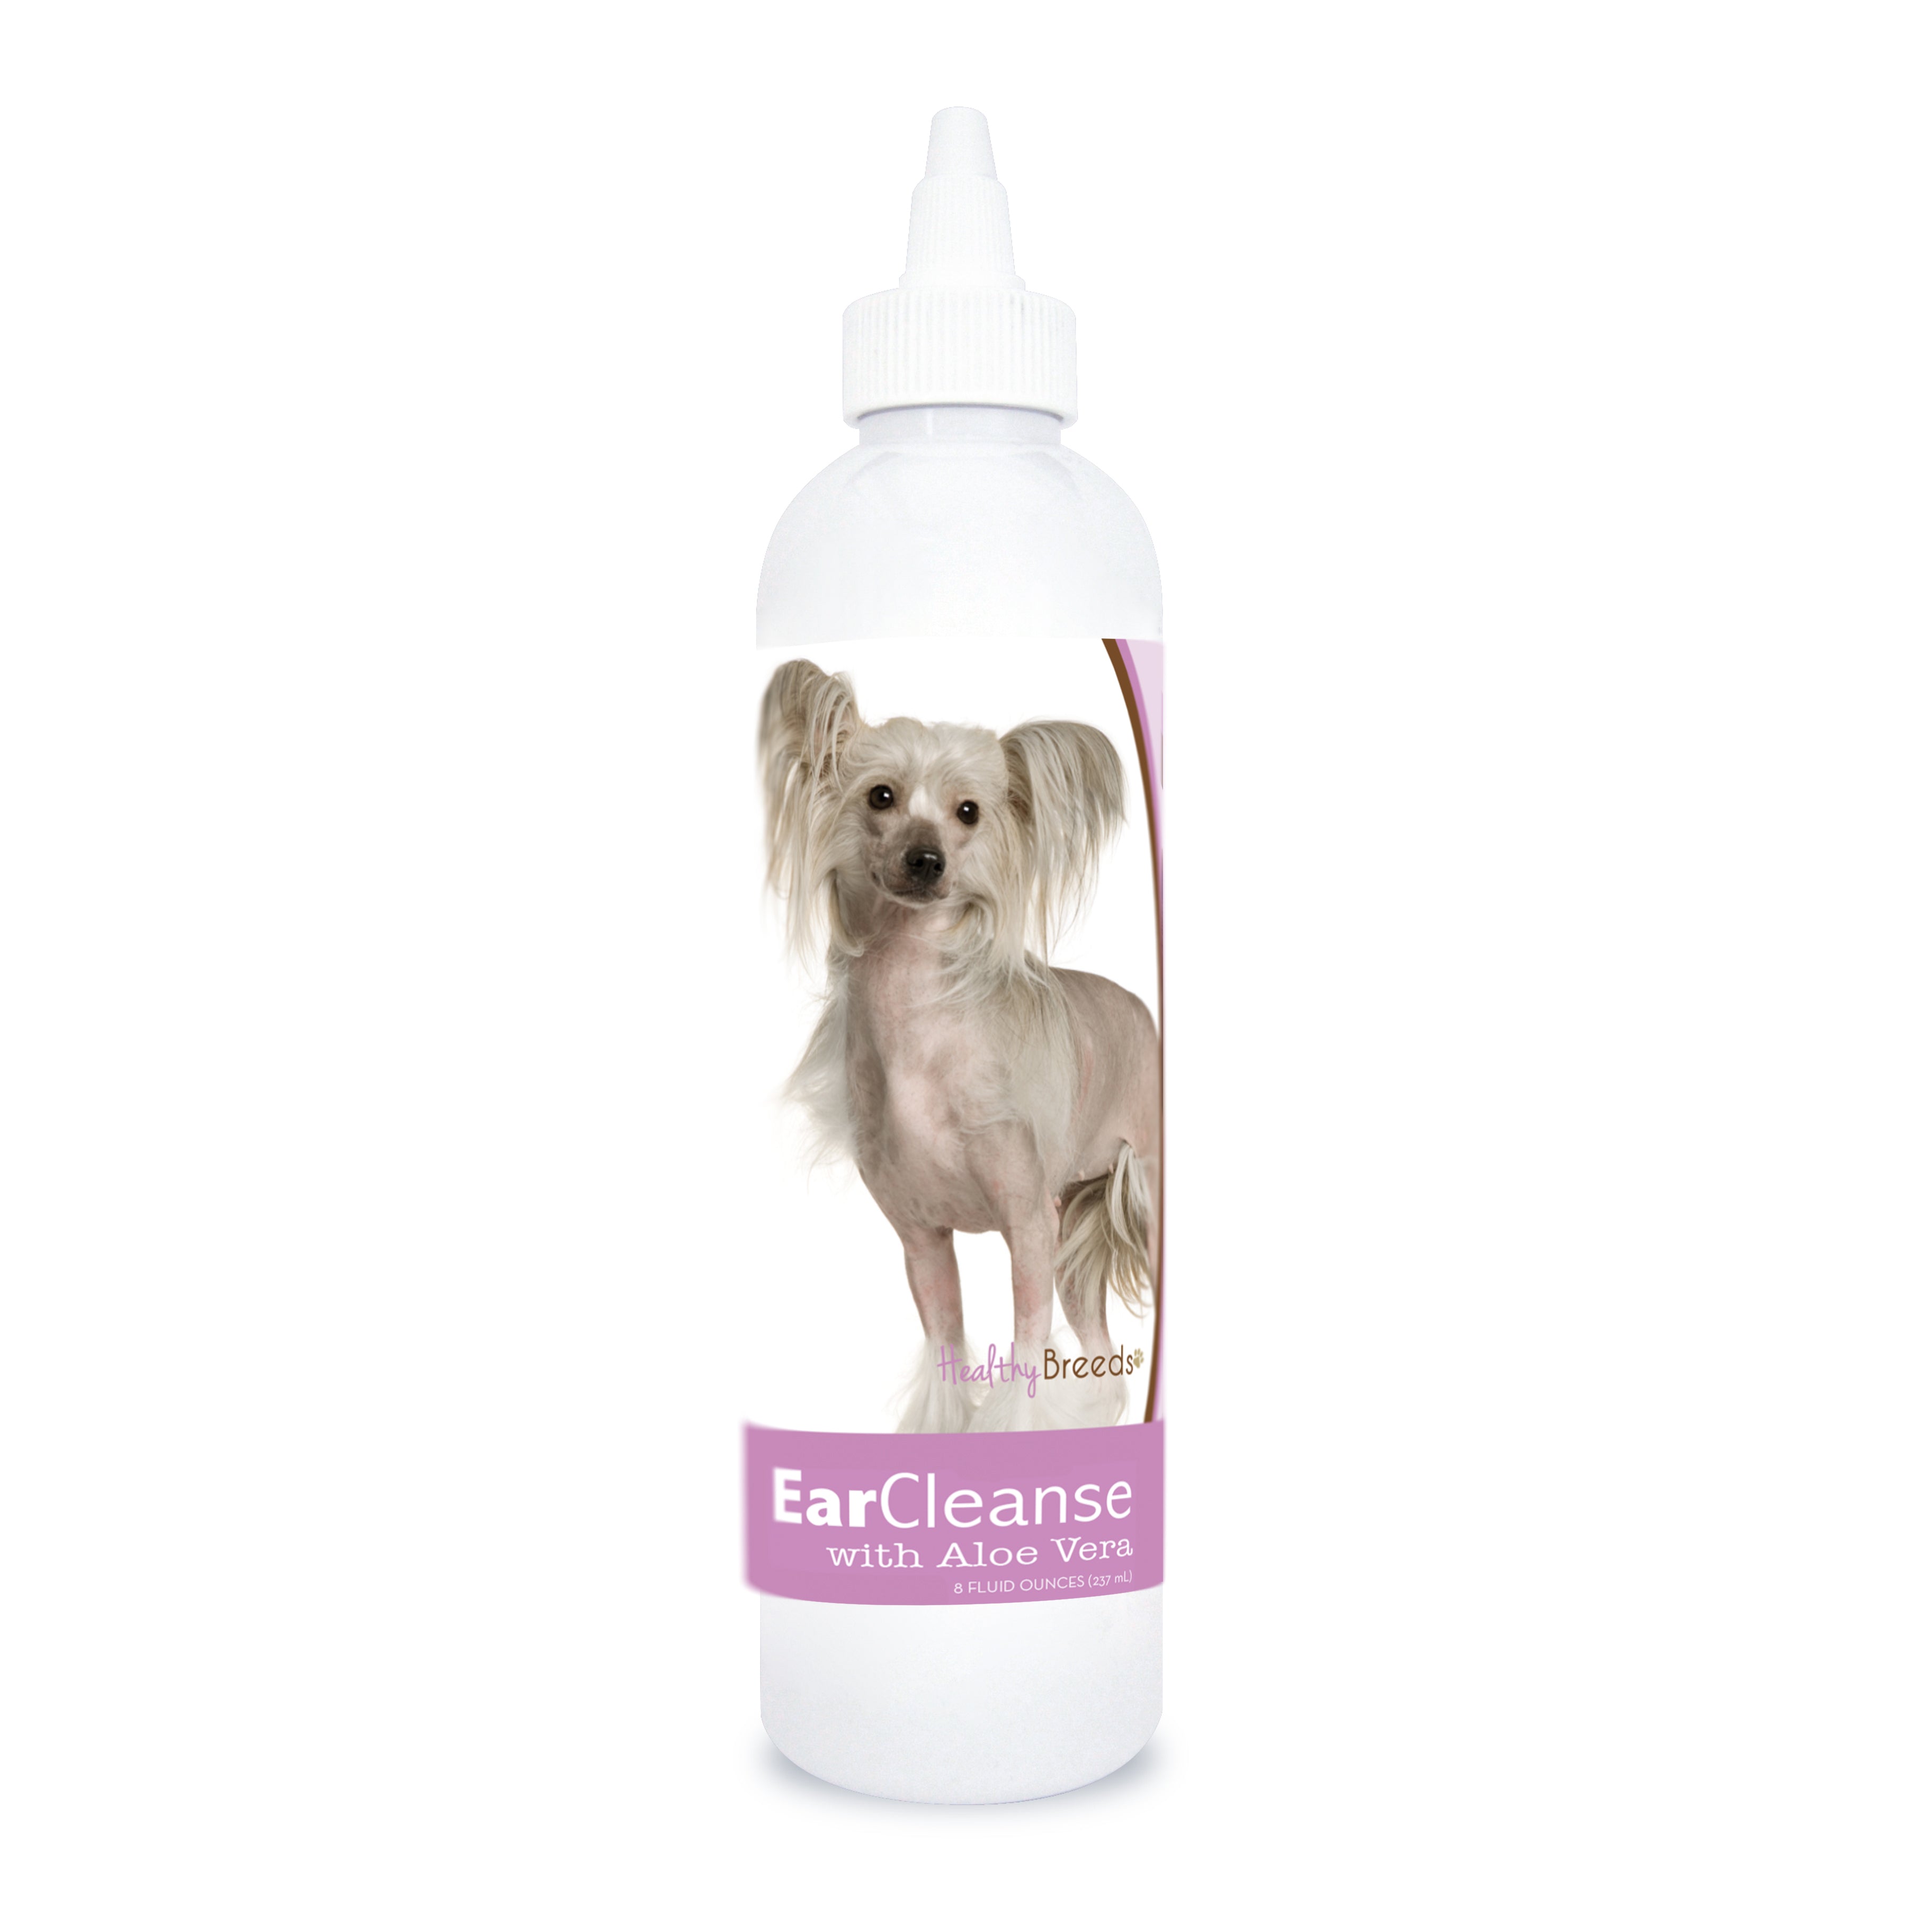 Chinese Crested Ear Cleanse with Aloe Vera Sweet Pea and Vanilla 8 oz